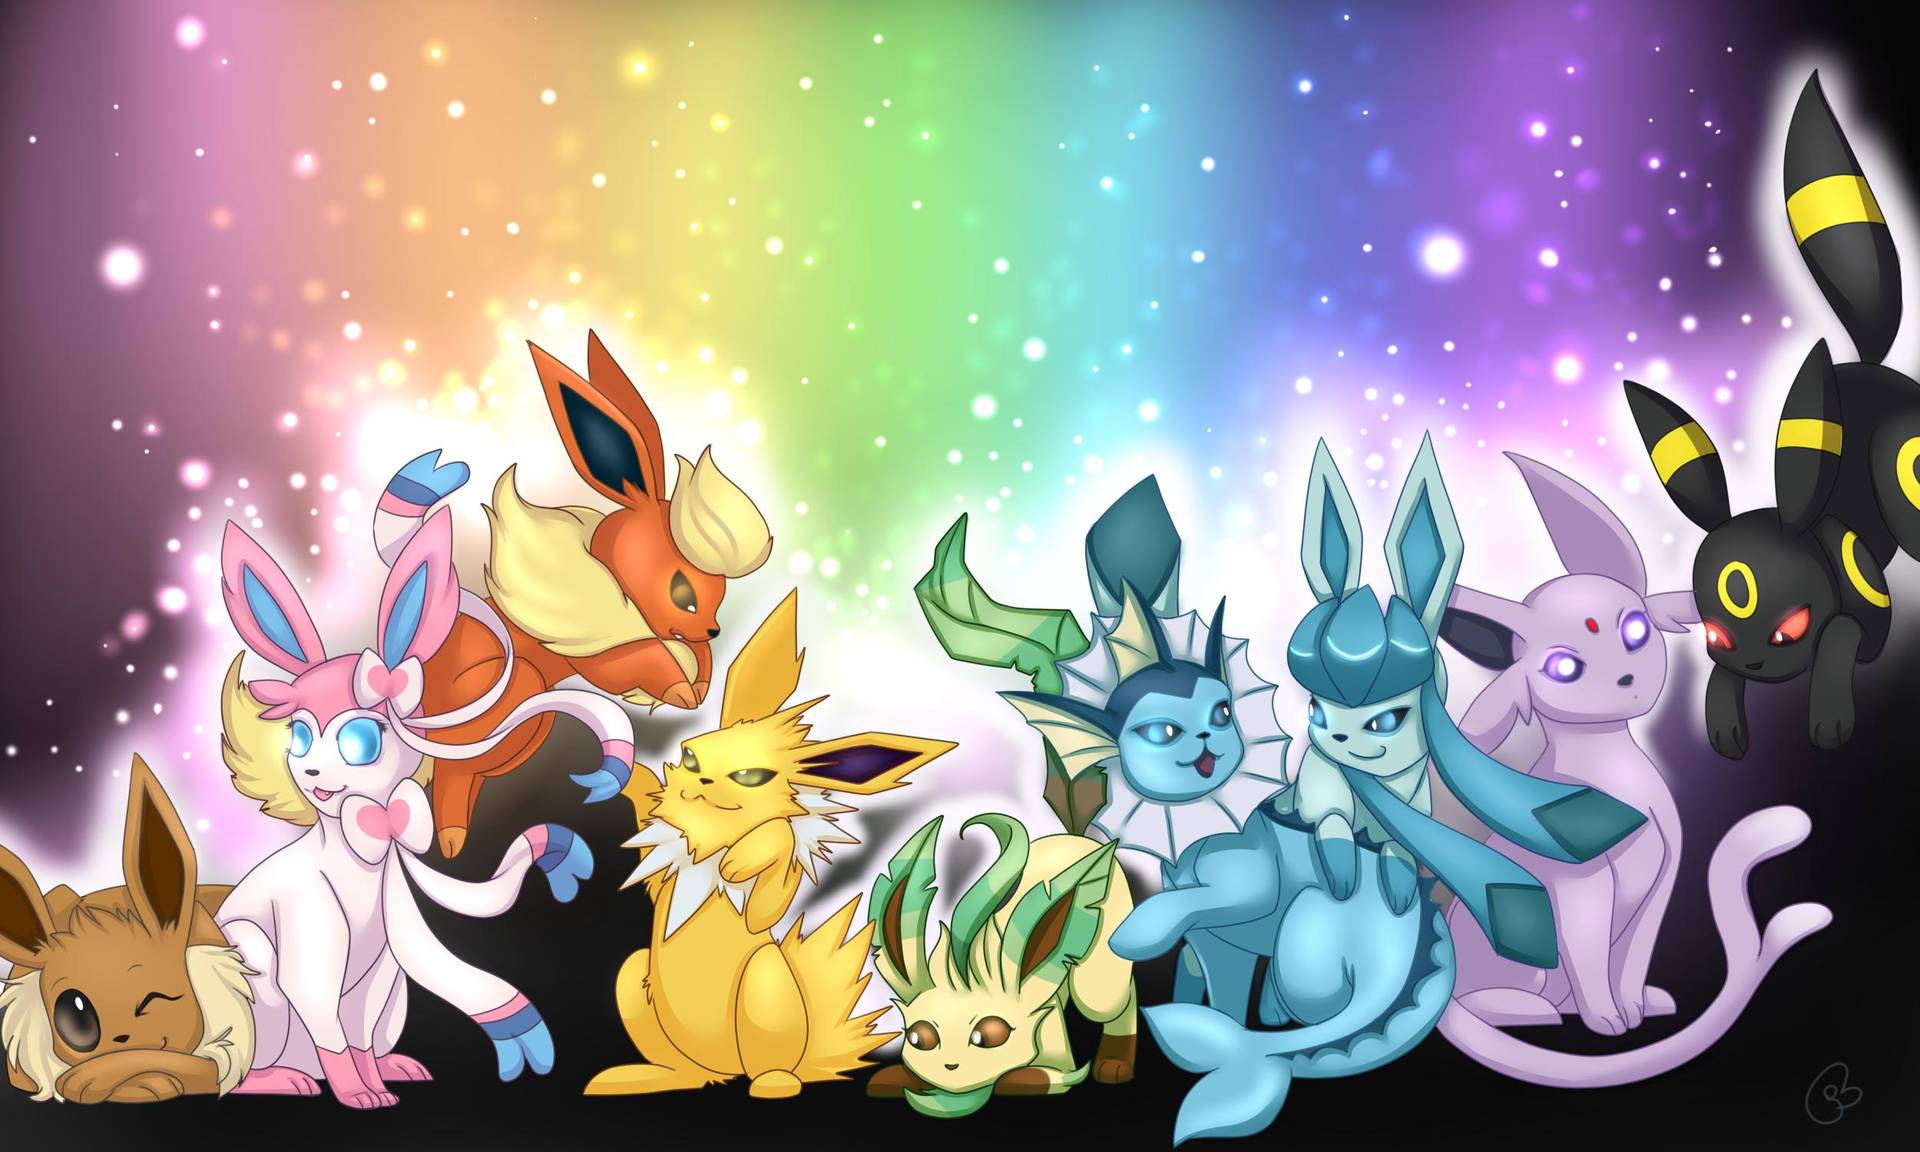 Eevee's Final Forms With Sylveon